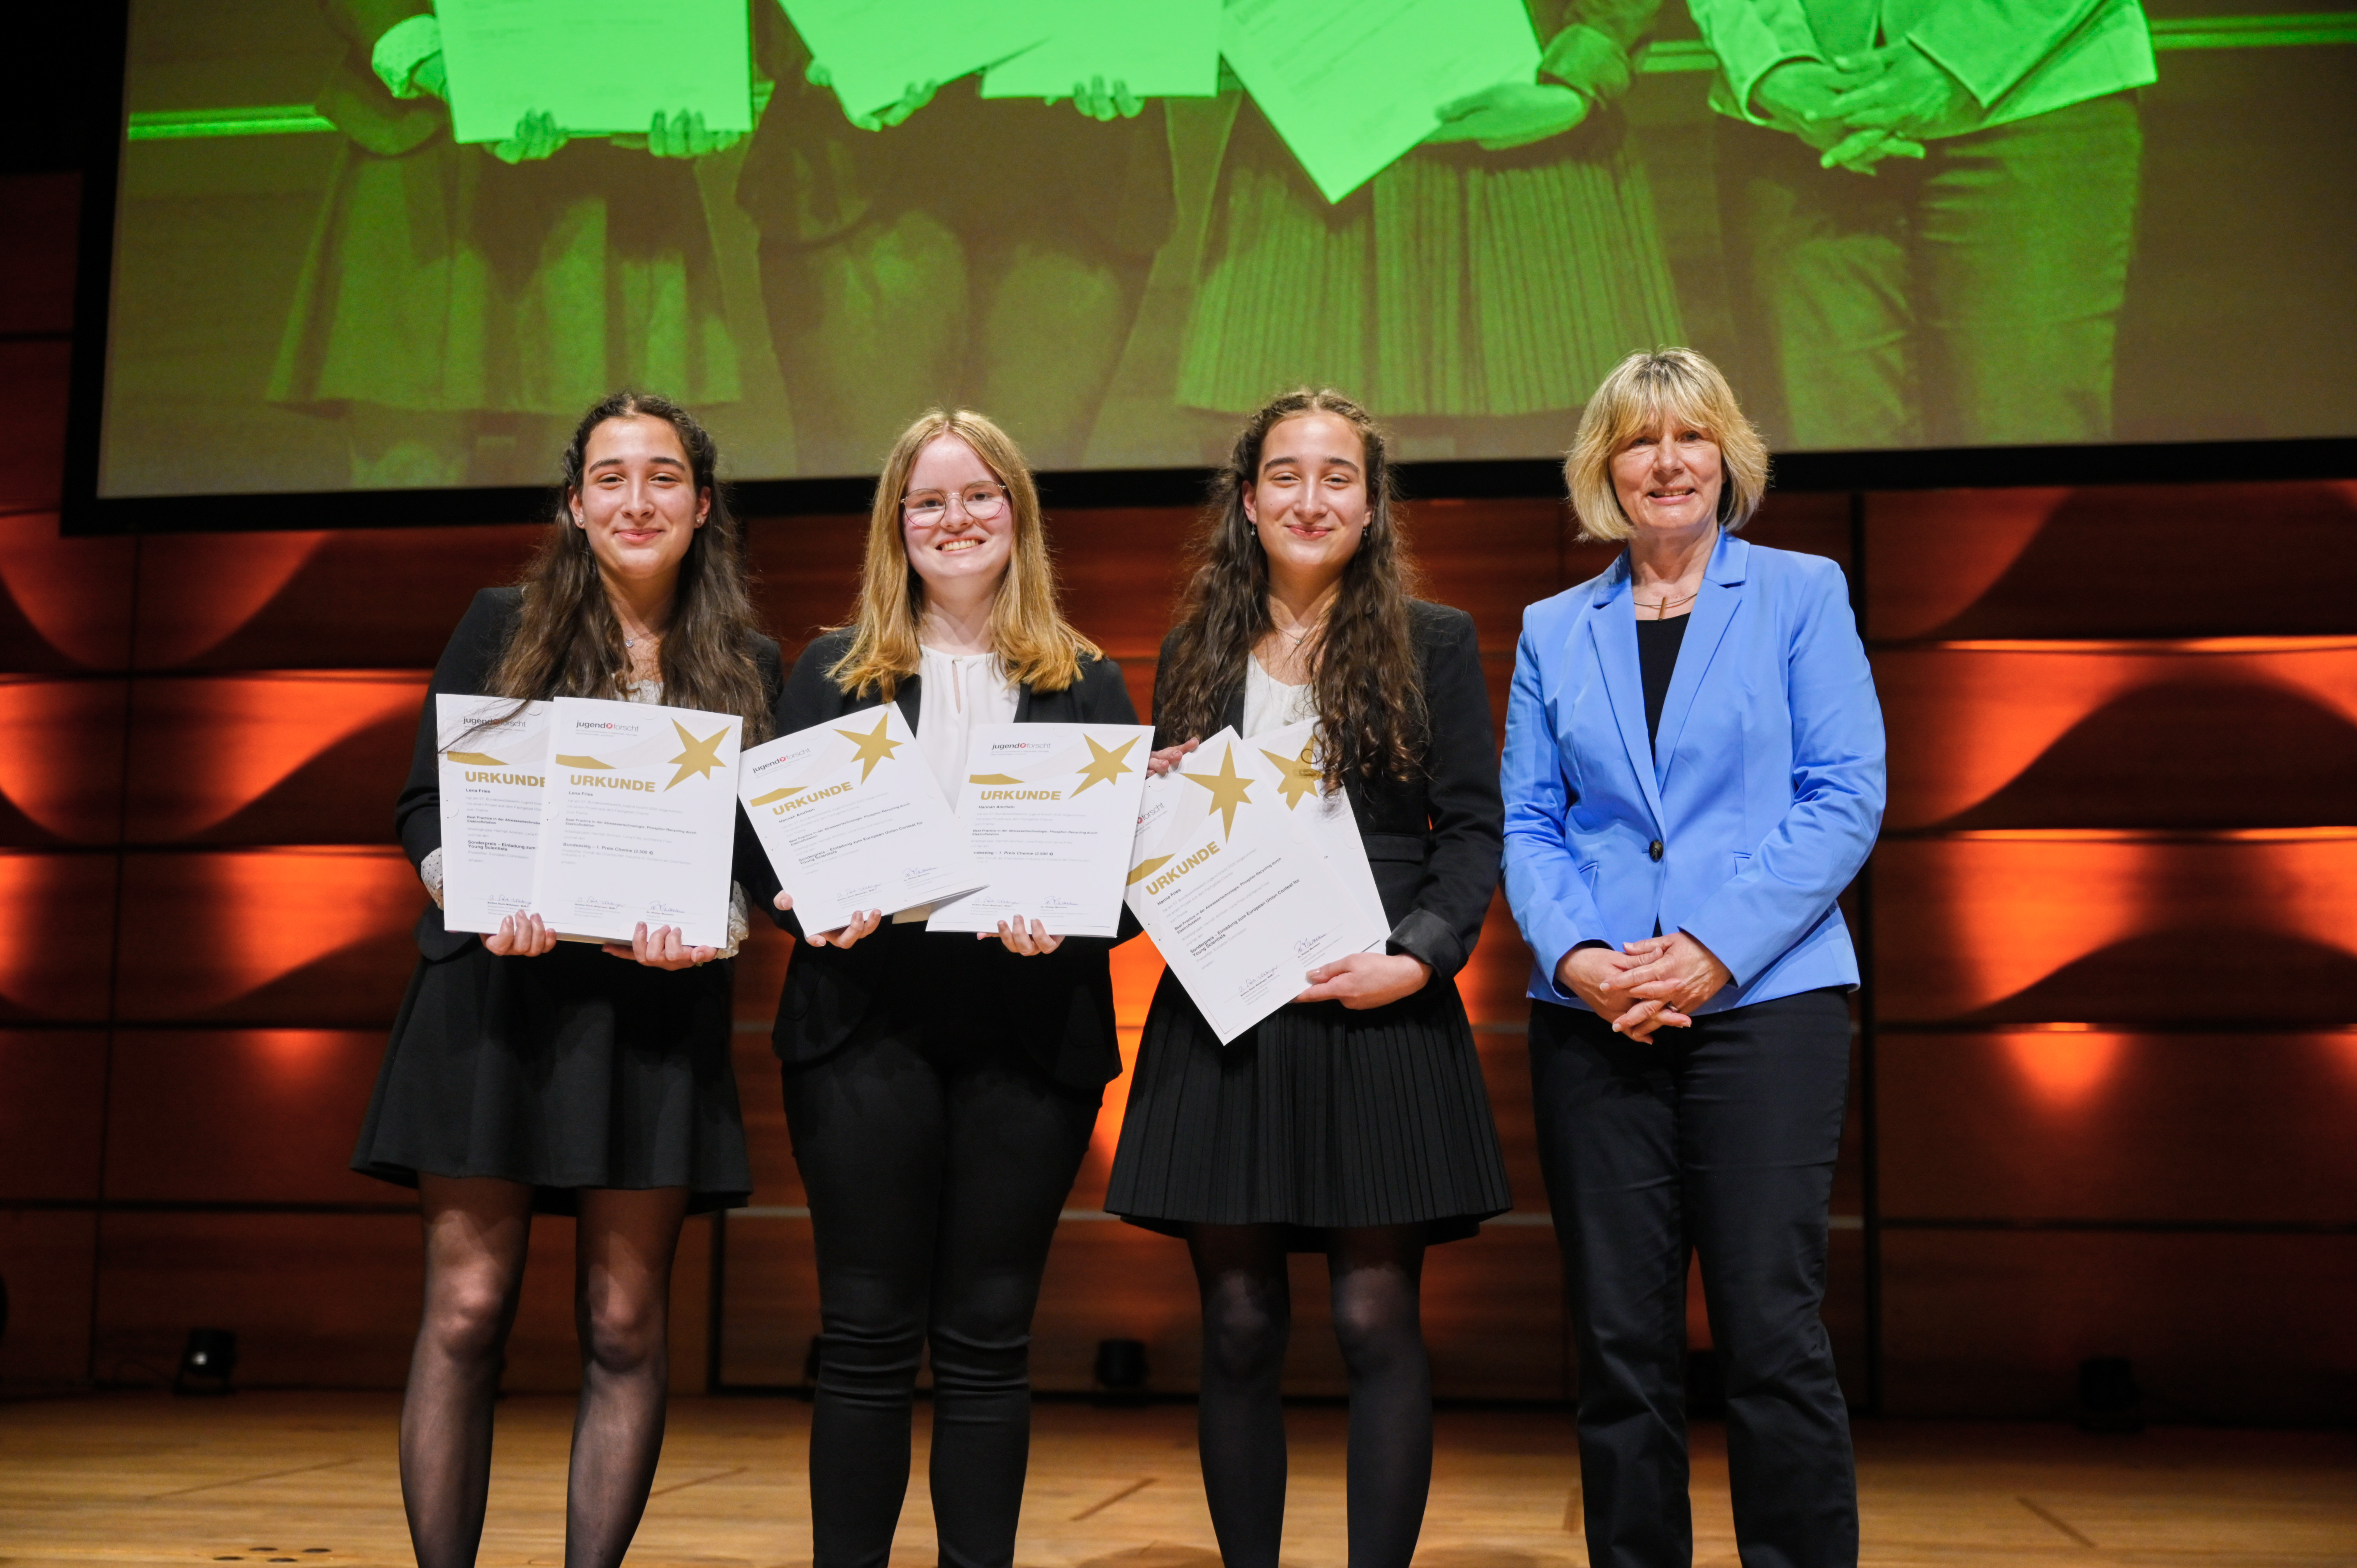 The national prizewinners in the field of chemistry (from left to right): Lena Fries, Hannah Amrhein and Hanna Fries. The Europa-Preis was handed over by Dr. Heide Ahrens, Secretary General of the DFG.